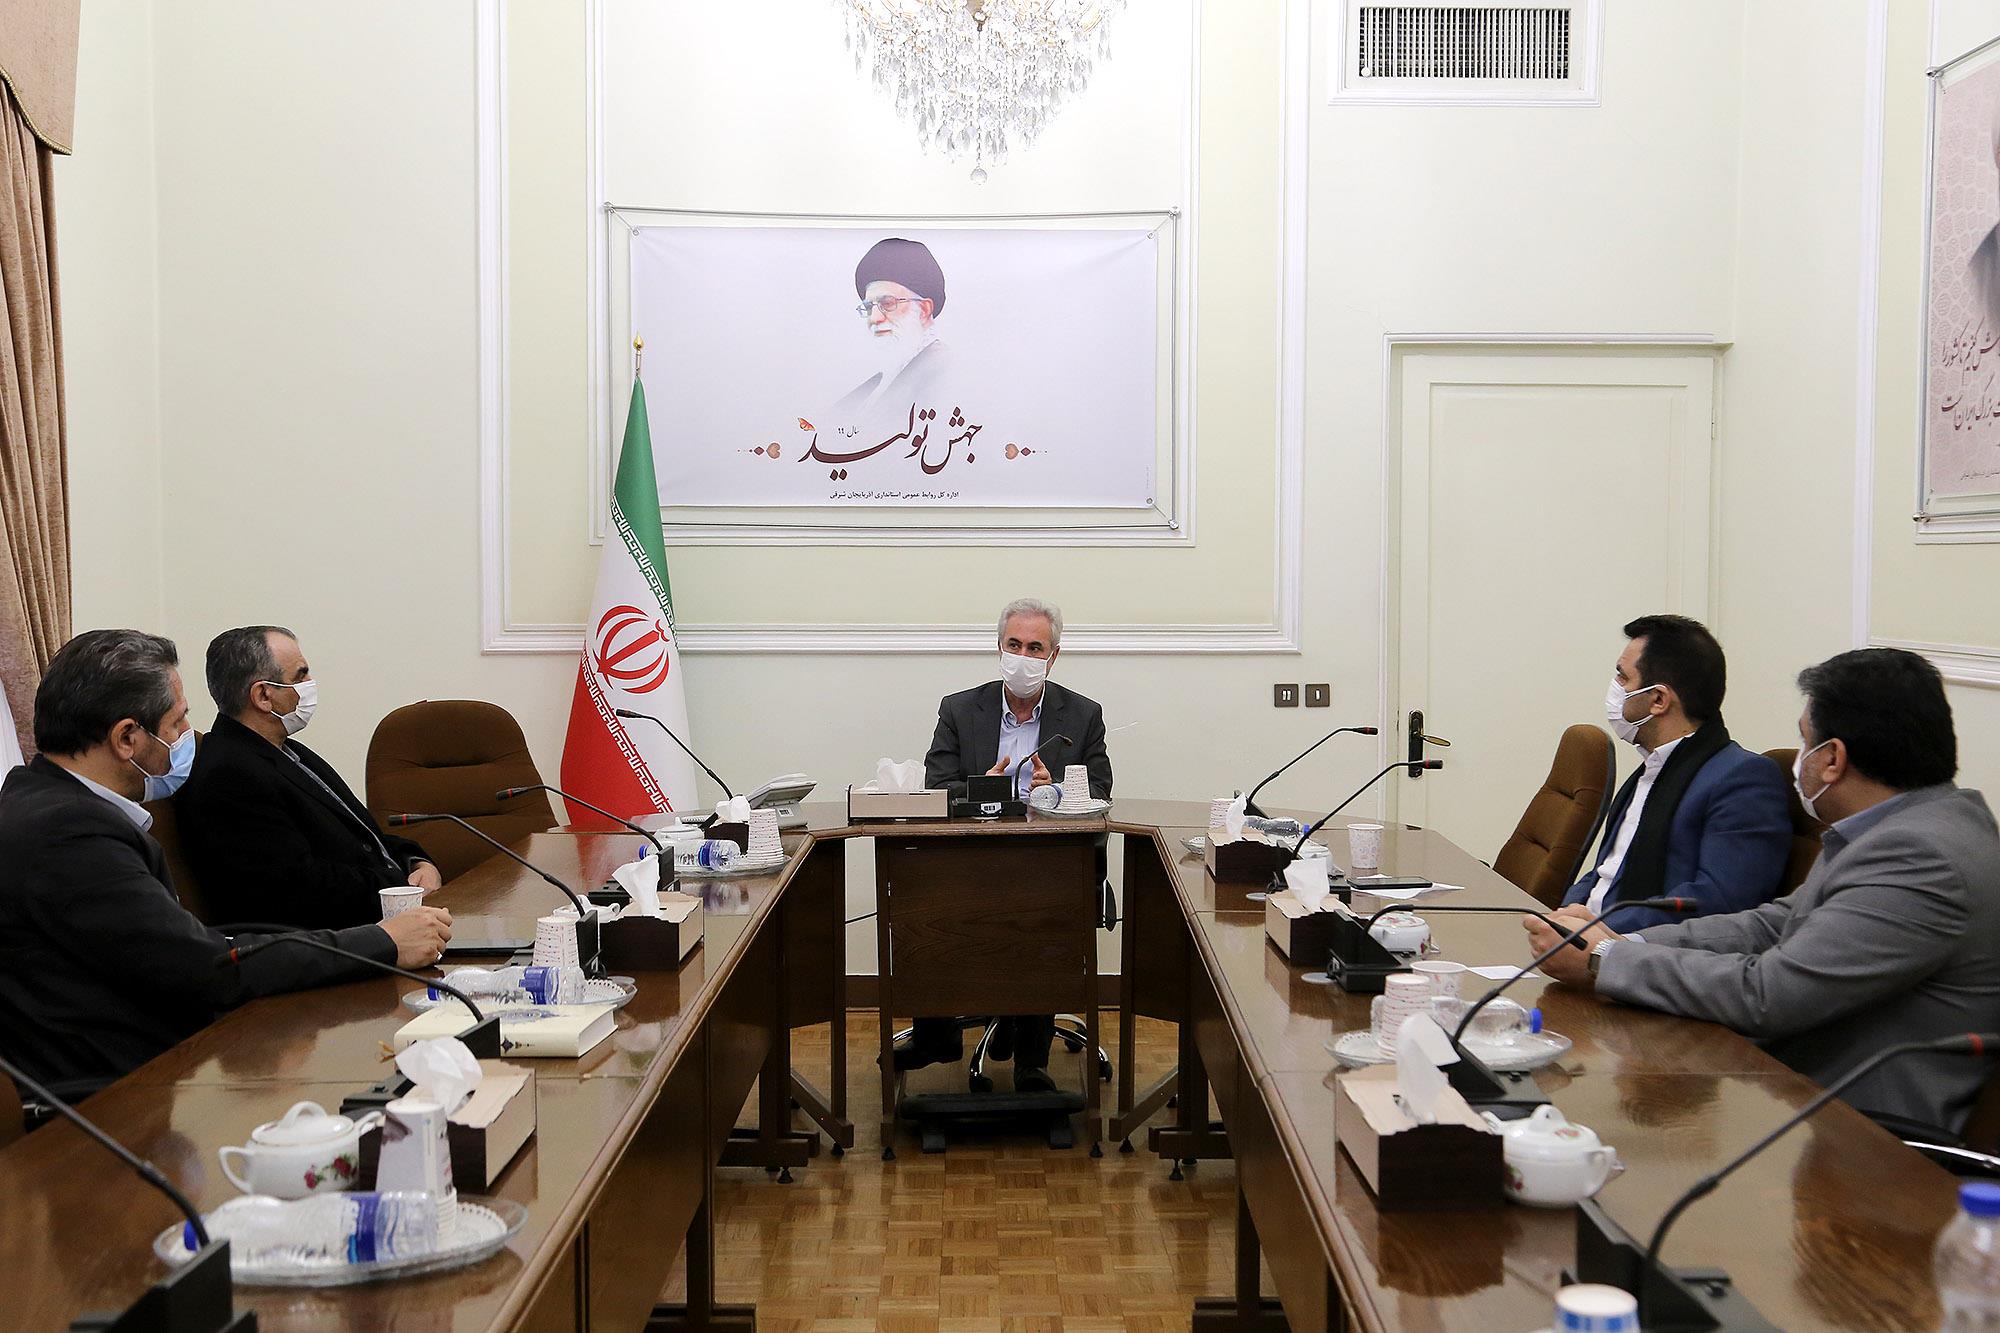 Governor of East Azerbaijan: The first phase of Tabriz Innovation Factory will be launched